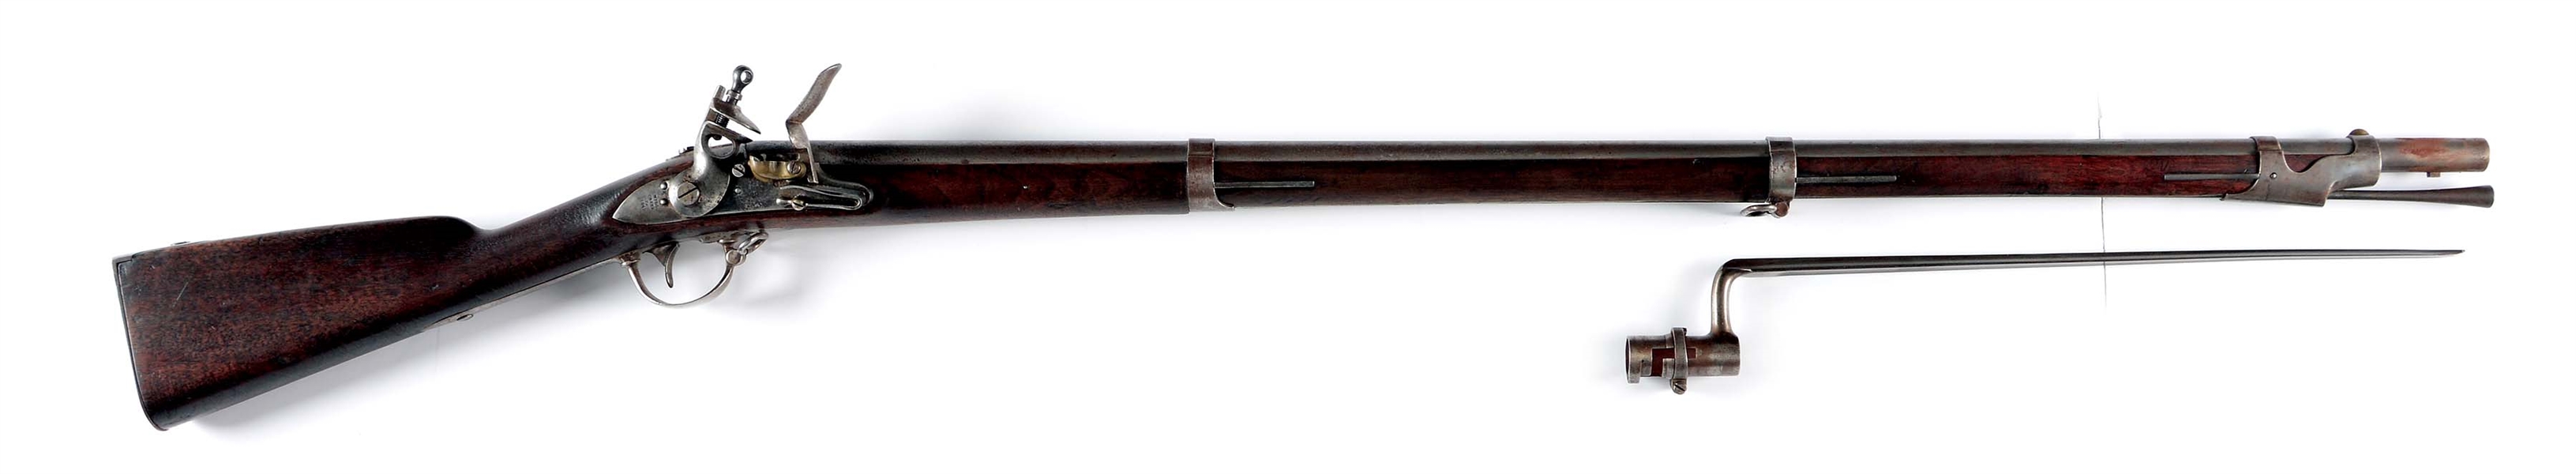 (A) D. NIPPES MODEL 1835/40 FLINT MUSKET, DATED 1842.